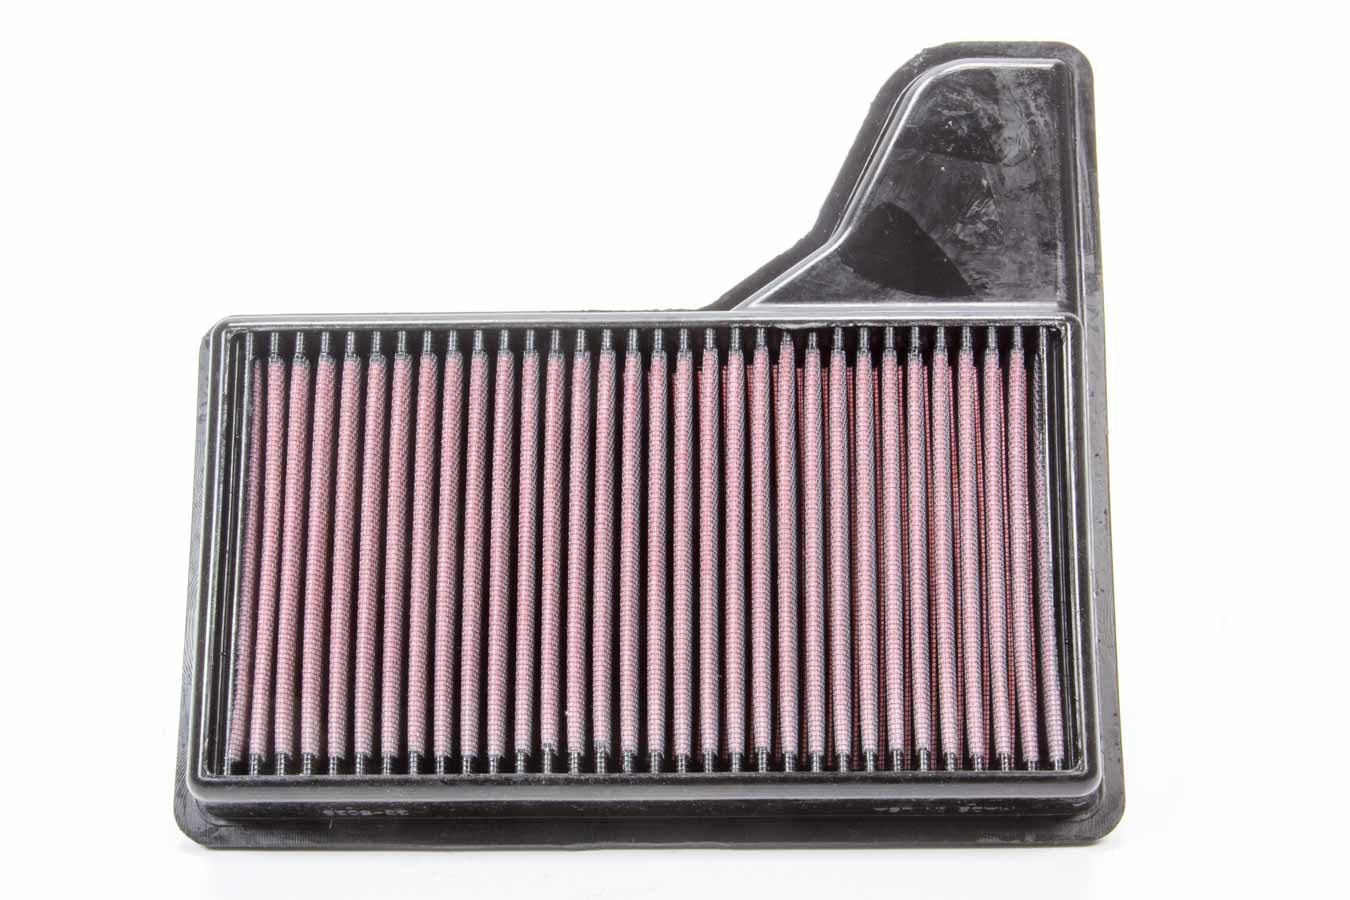 K & N Air Filter Element, Panel, 11-11/32 x 10-3/8 in, 1-1/2" Tall, Reusable Cotton, Ford Mustang 2015-17, Each